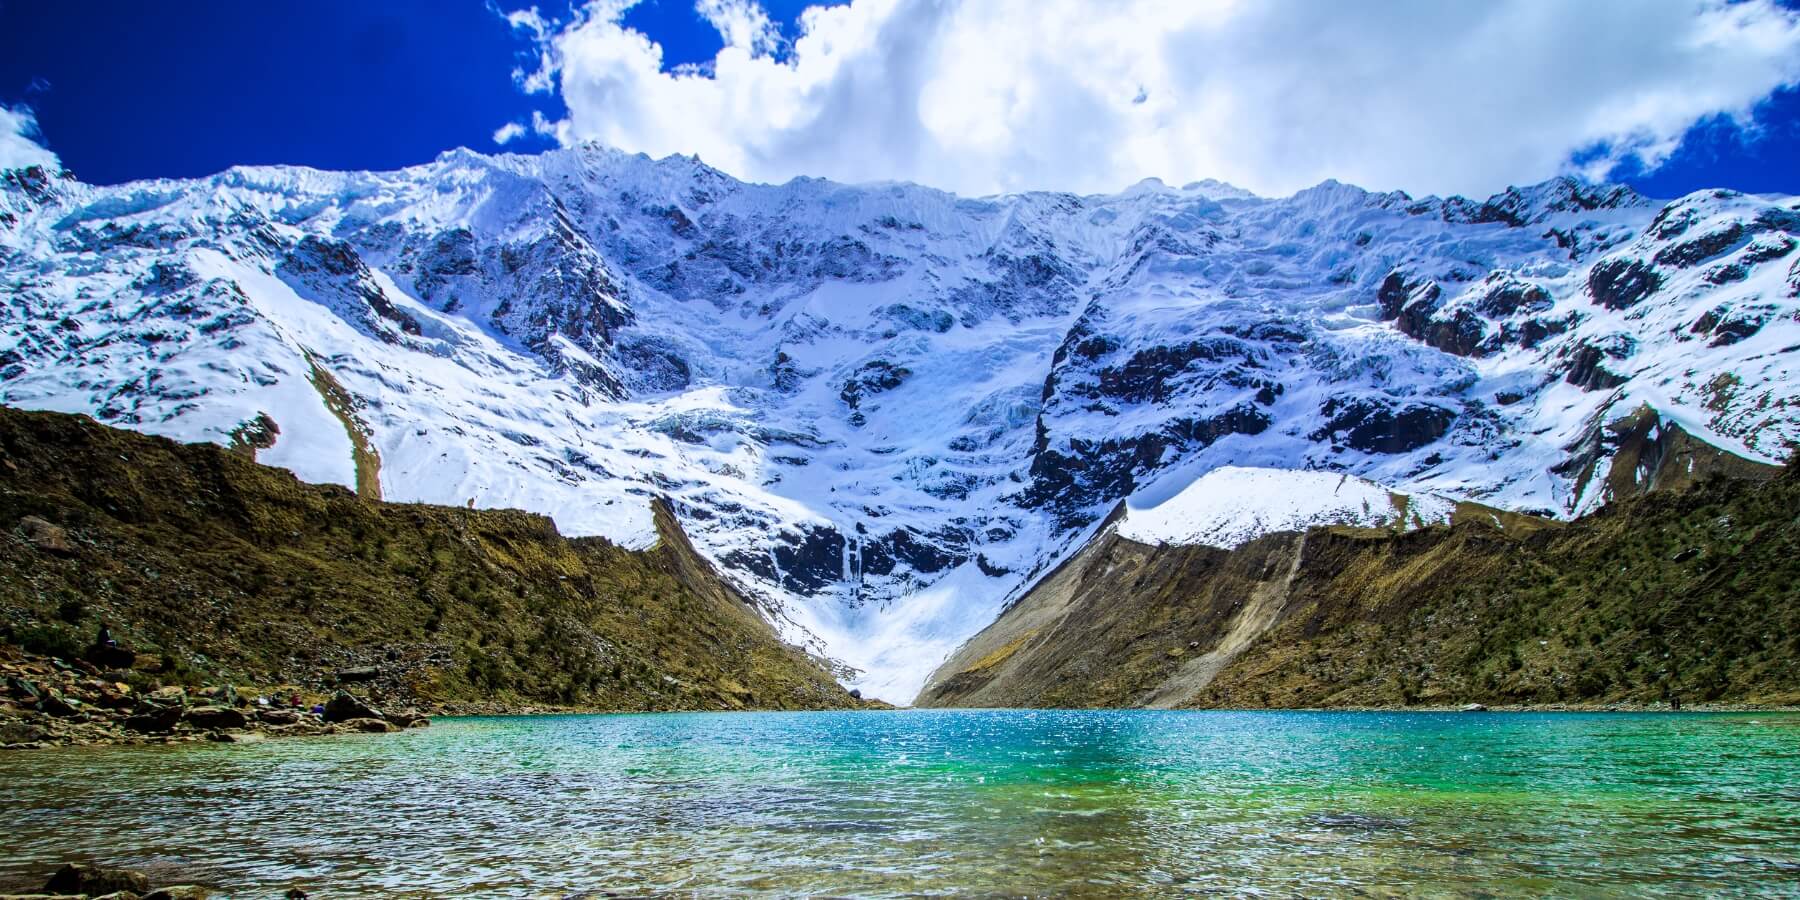 Tour to Machu Picchu, Sacred Valley and Humantay Lake 3 Days | Inca Trail Expeditions